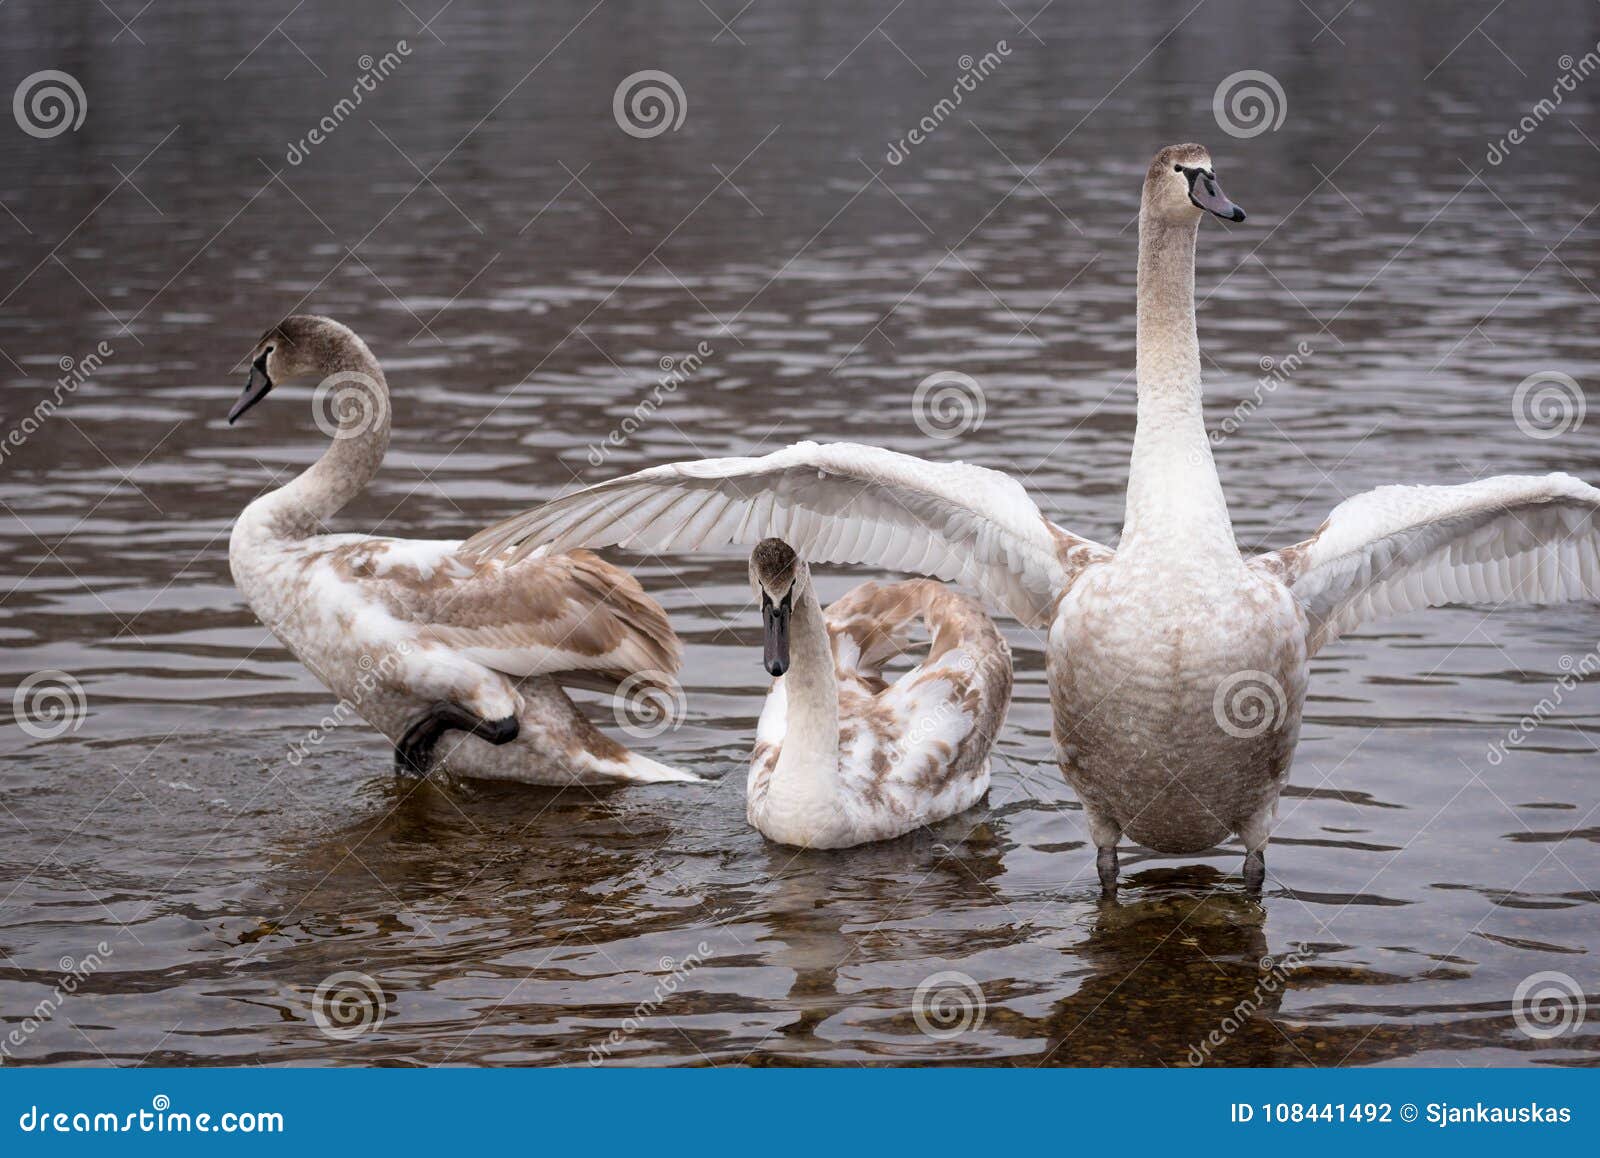 mute swans, grown-up cygnet stretching its wings to defend itself